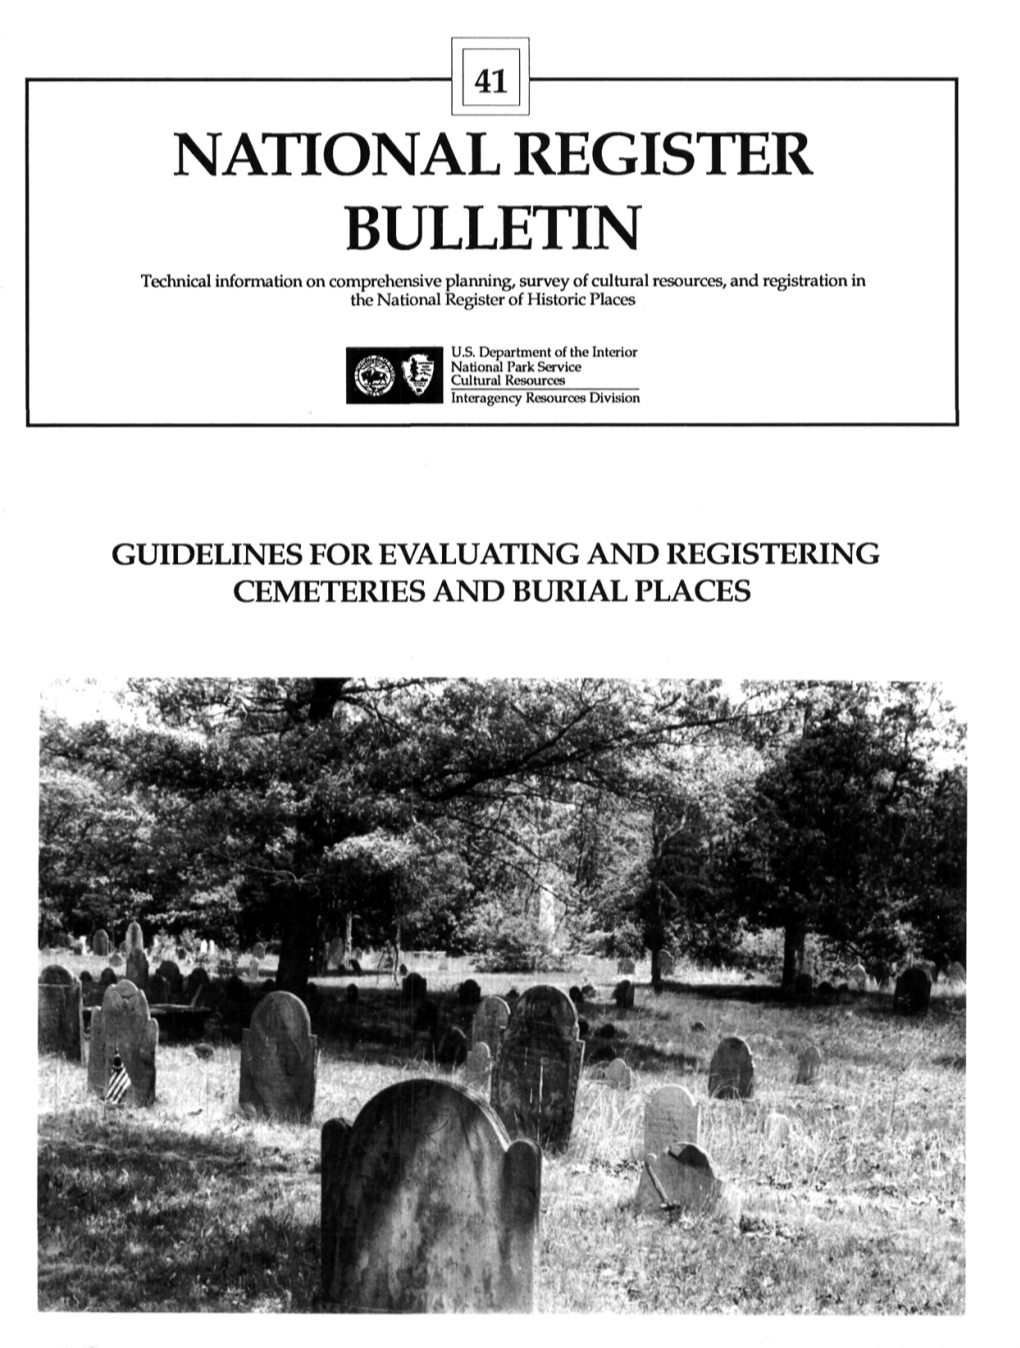 NATIONALREGISTER BULLETIN Technical Information on Comprehensive Planning, Survey of Cultural Resources, and Registration in the National Register of Historic Places